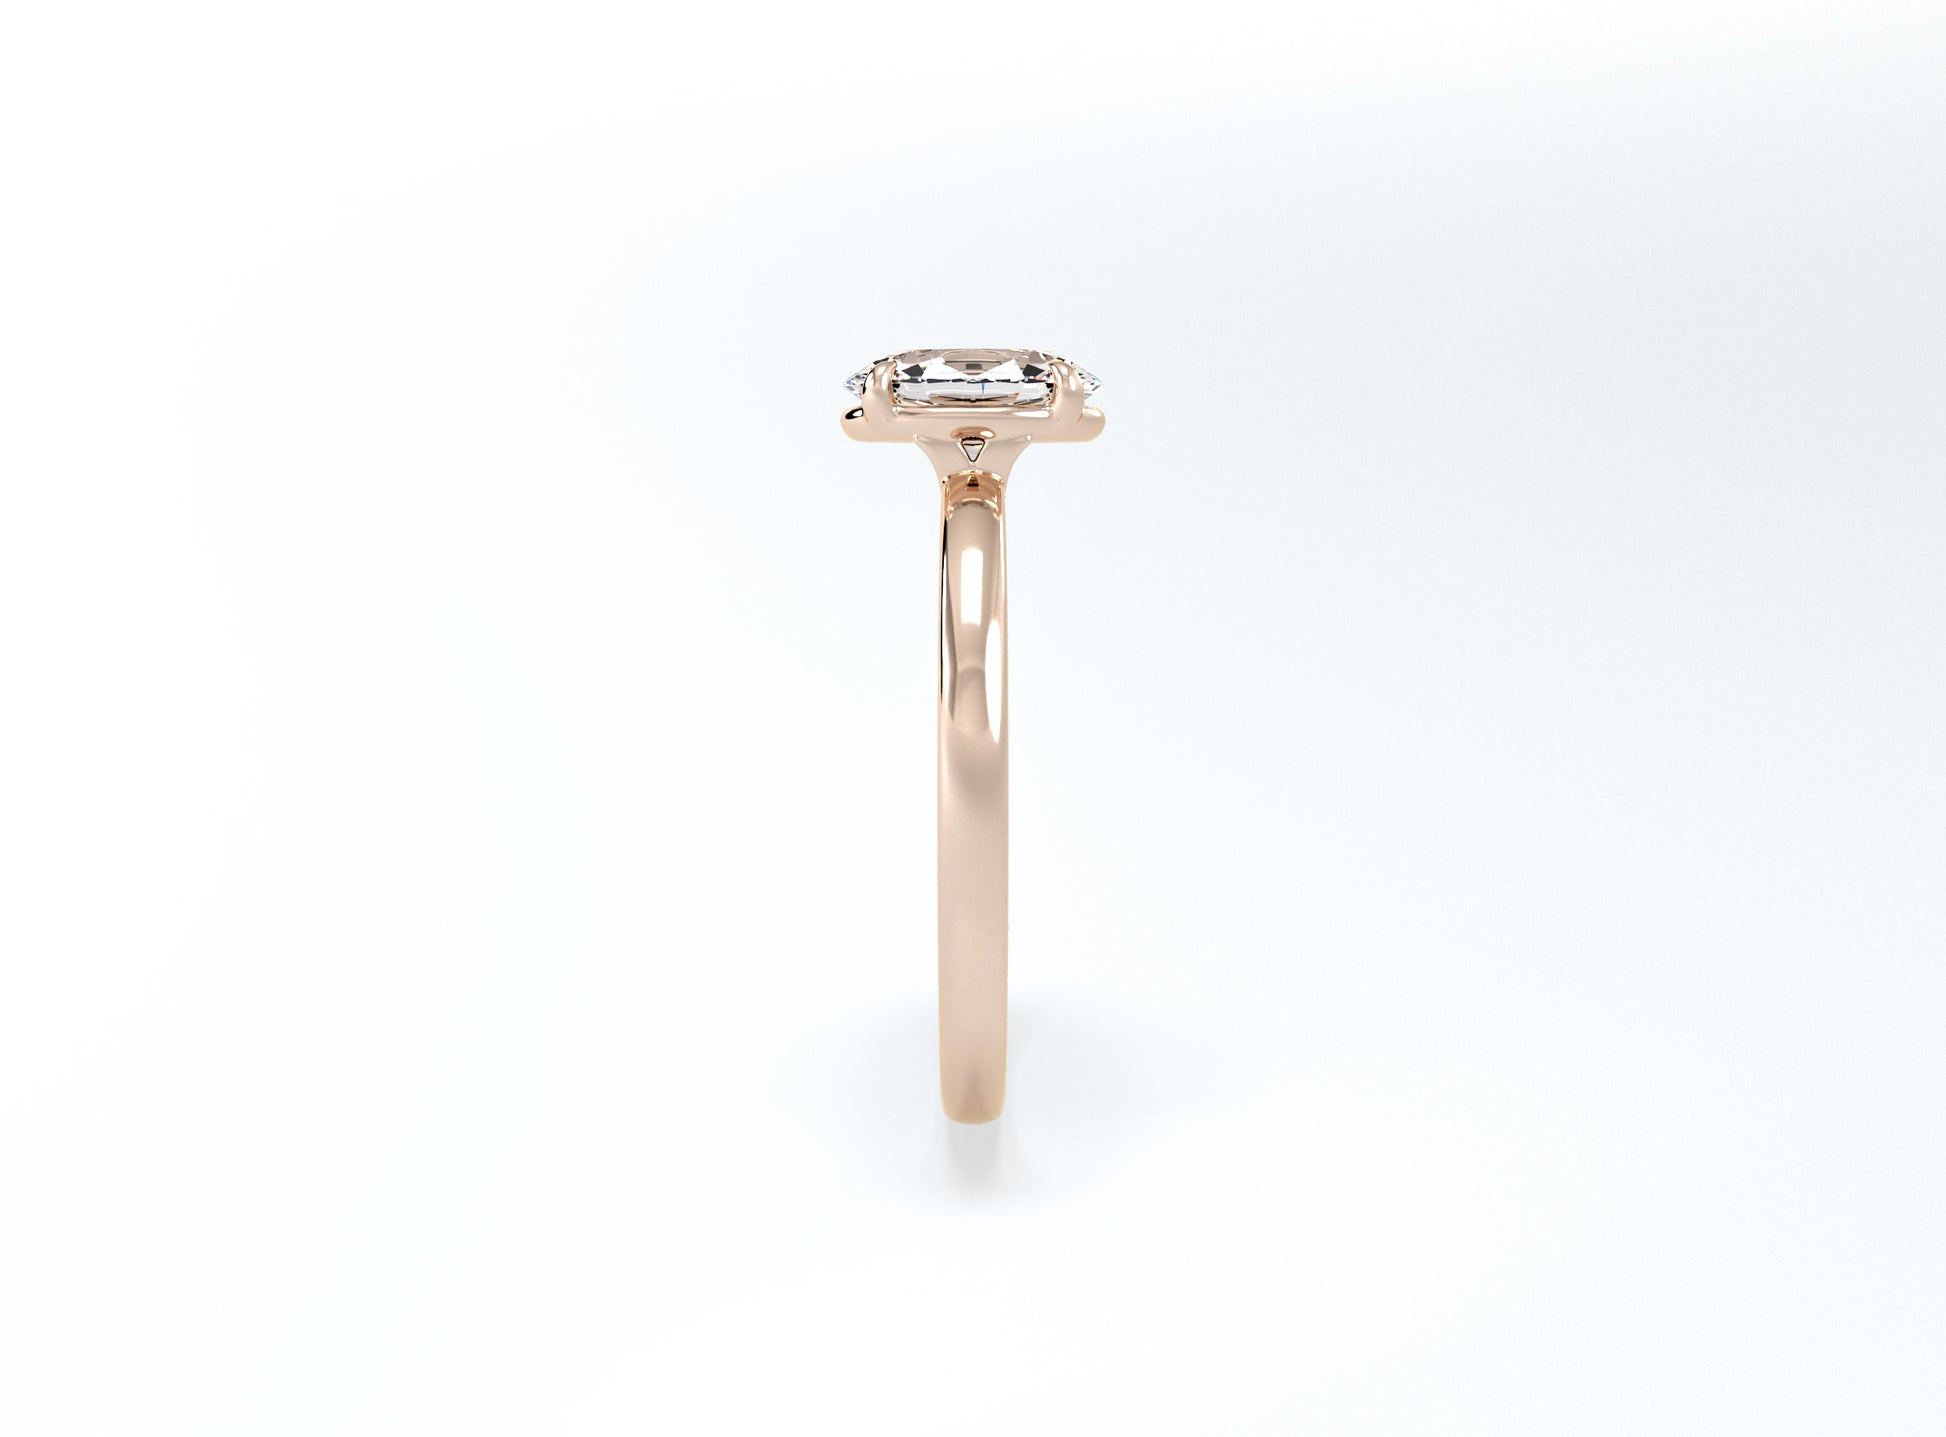 Oval Solitaire Ring - Rose Gold - Bodega